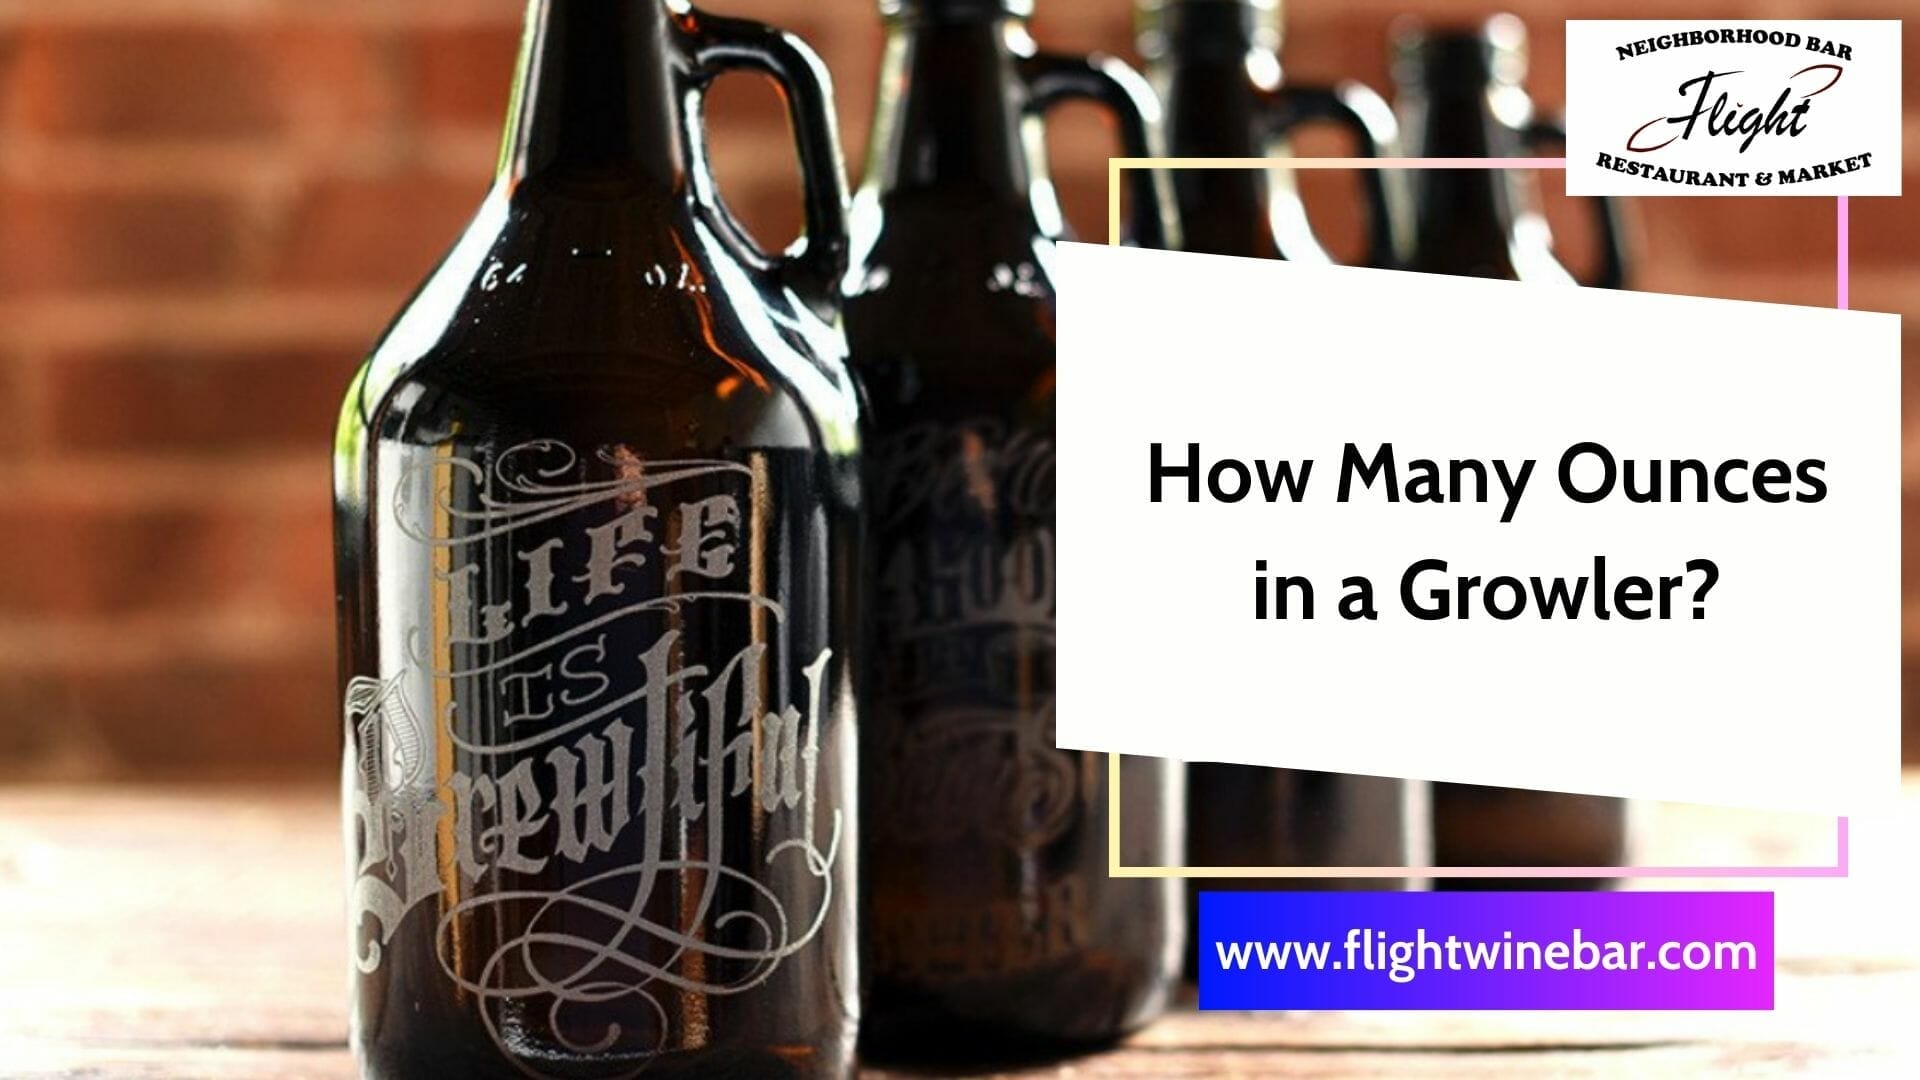 How Many Ounces in a Growler